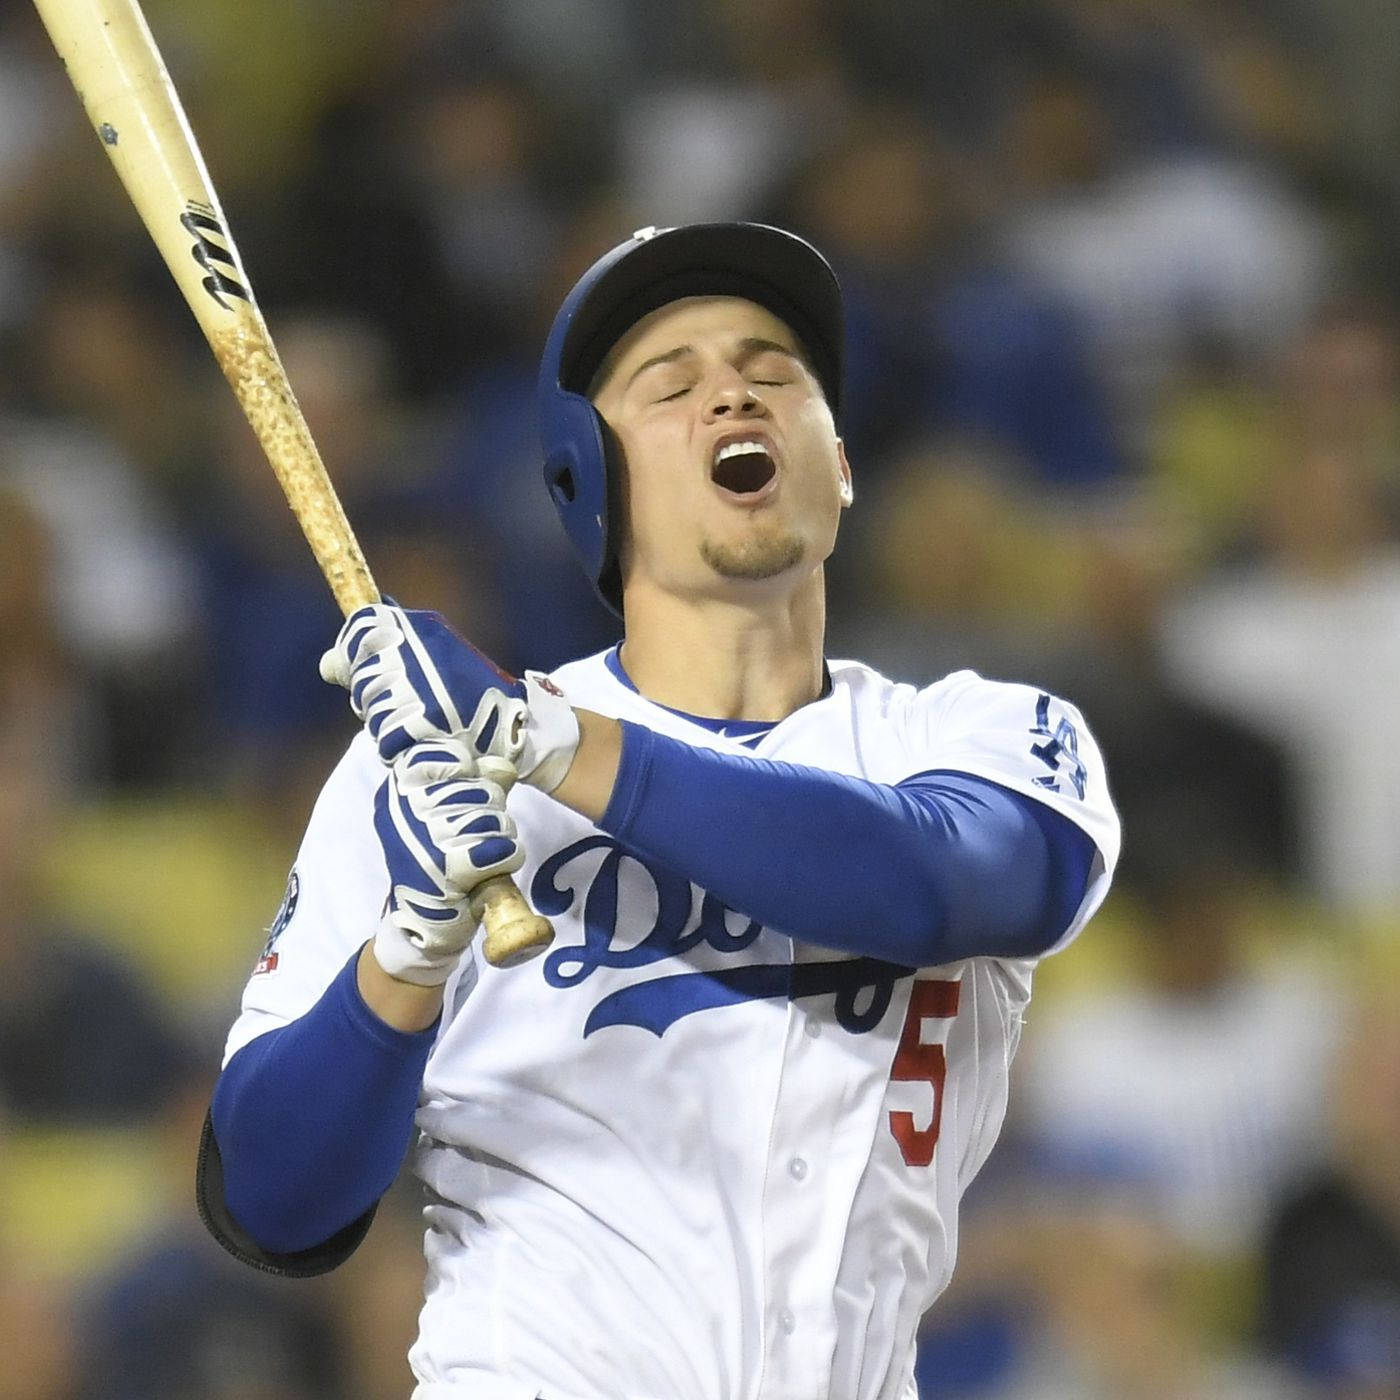 Corey Seager Holding Bat Open Mouth And Eyes Closed Background